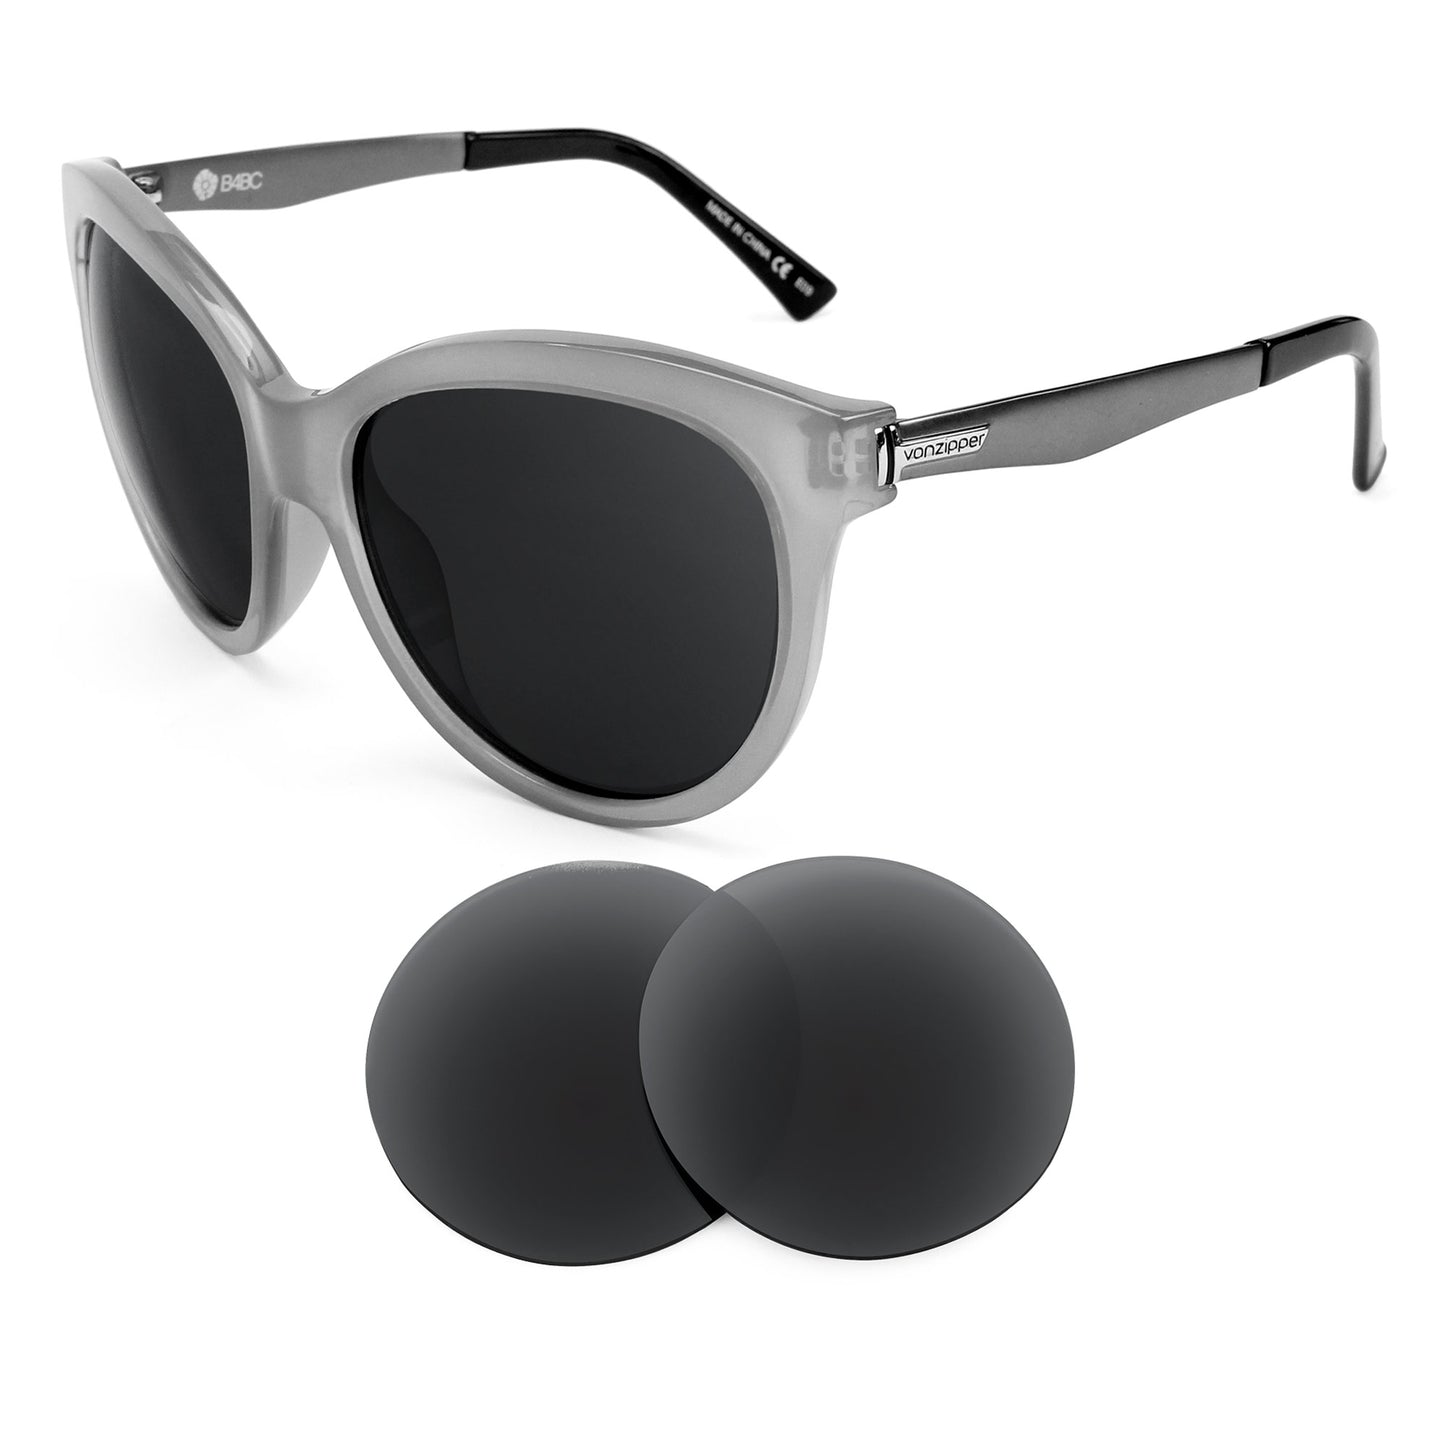 VonZipper Cheeks sunglasses with replacement lenses